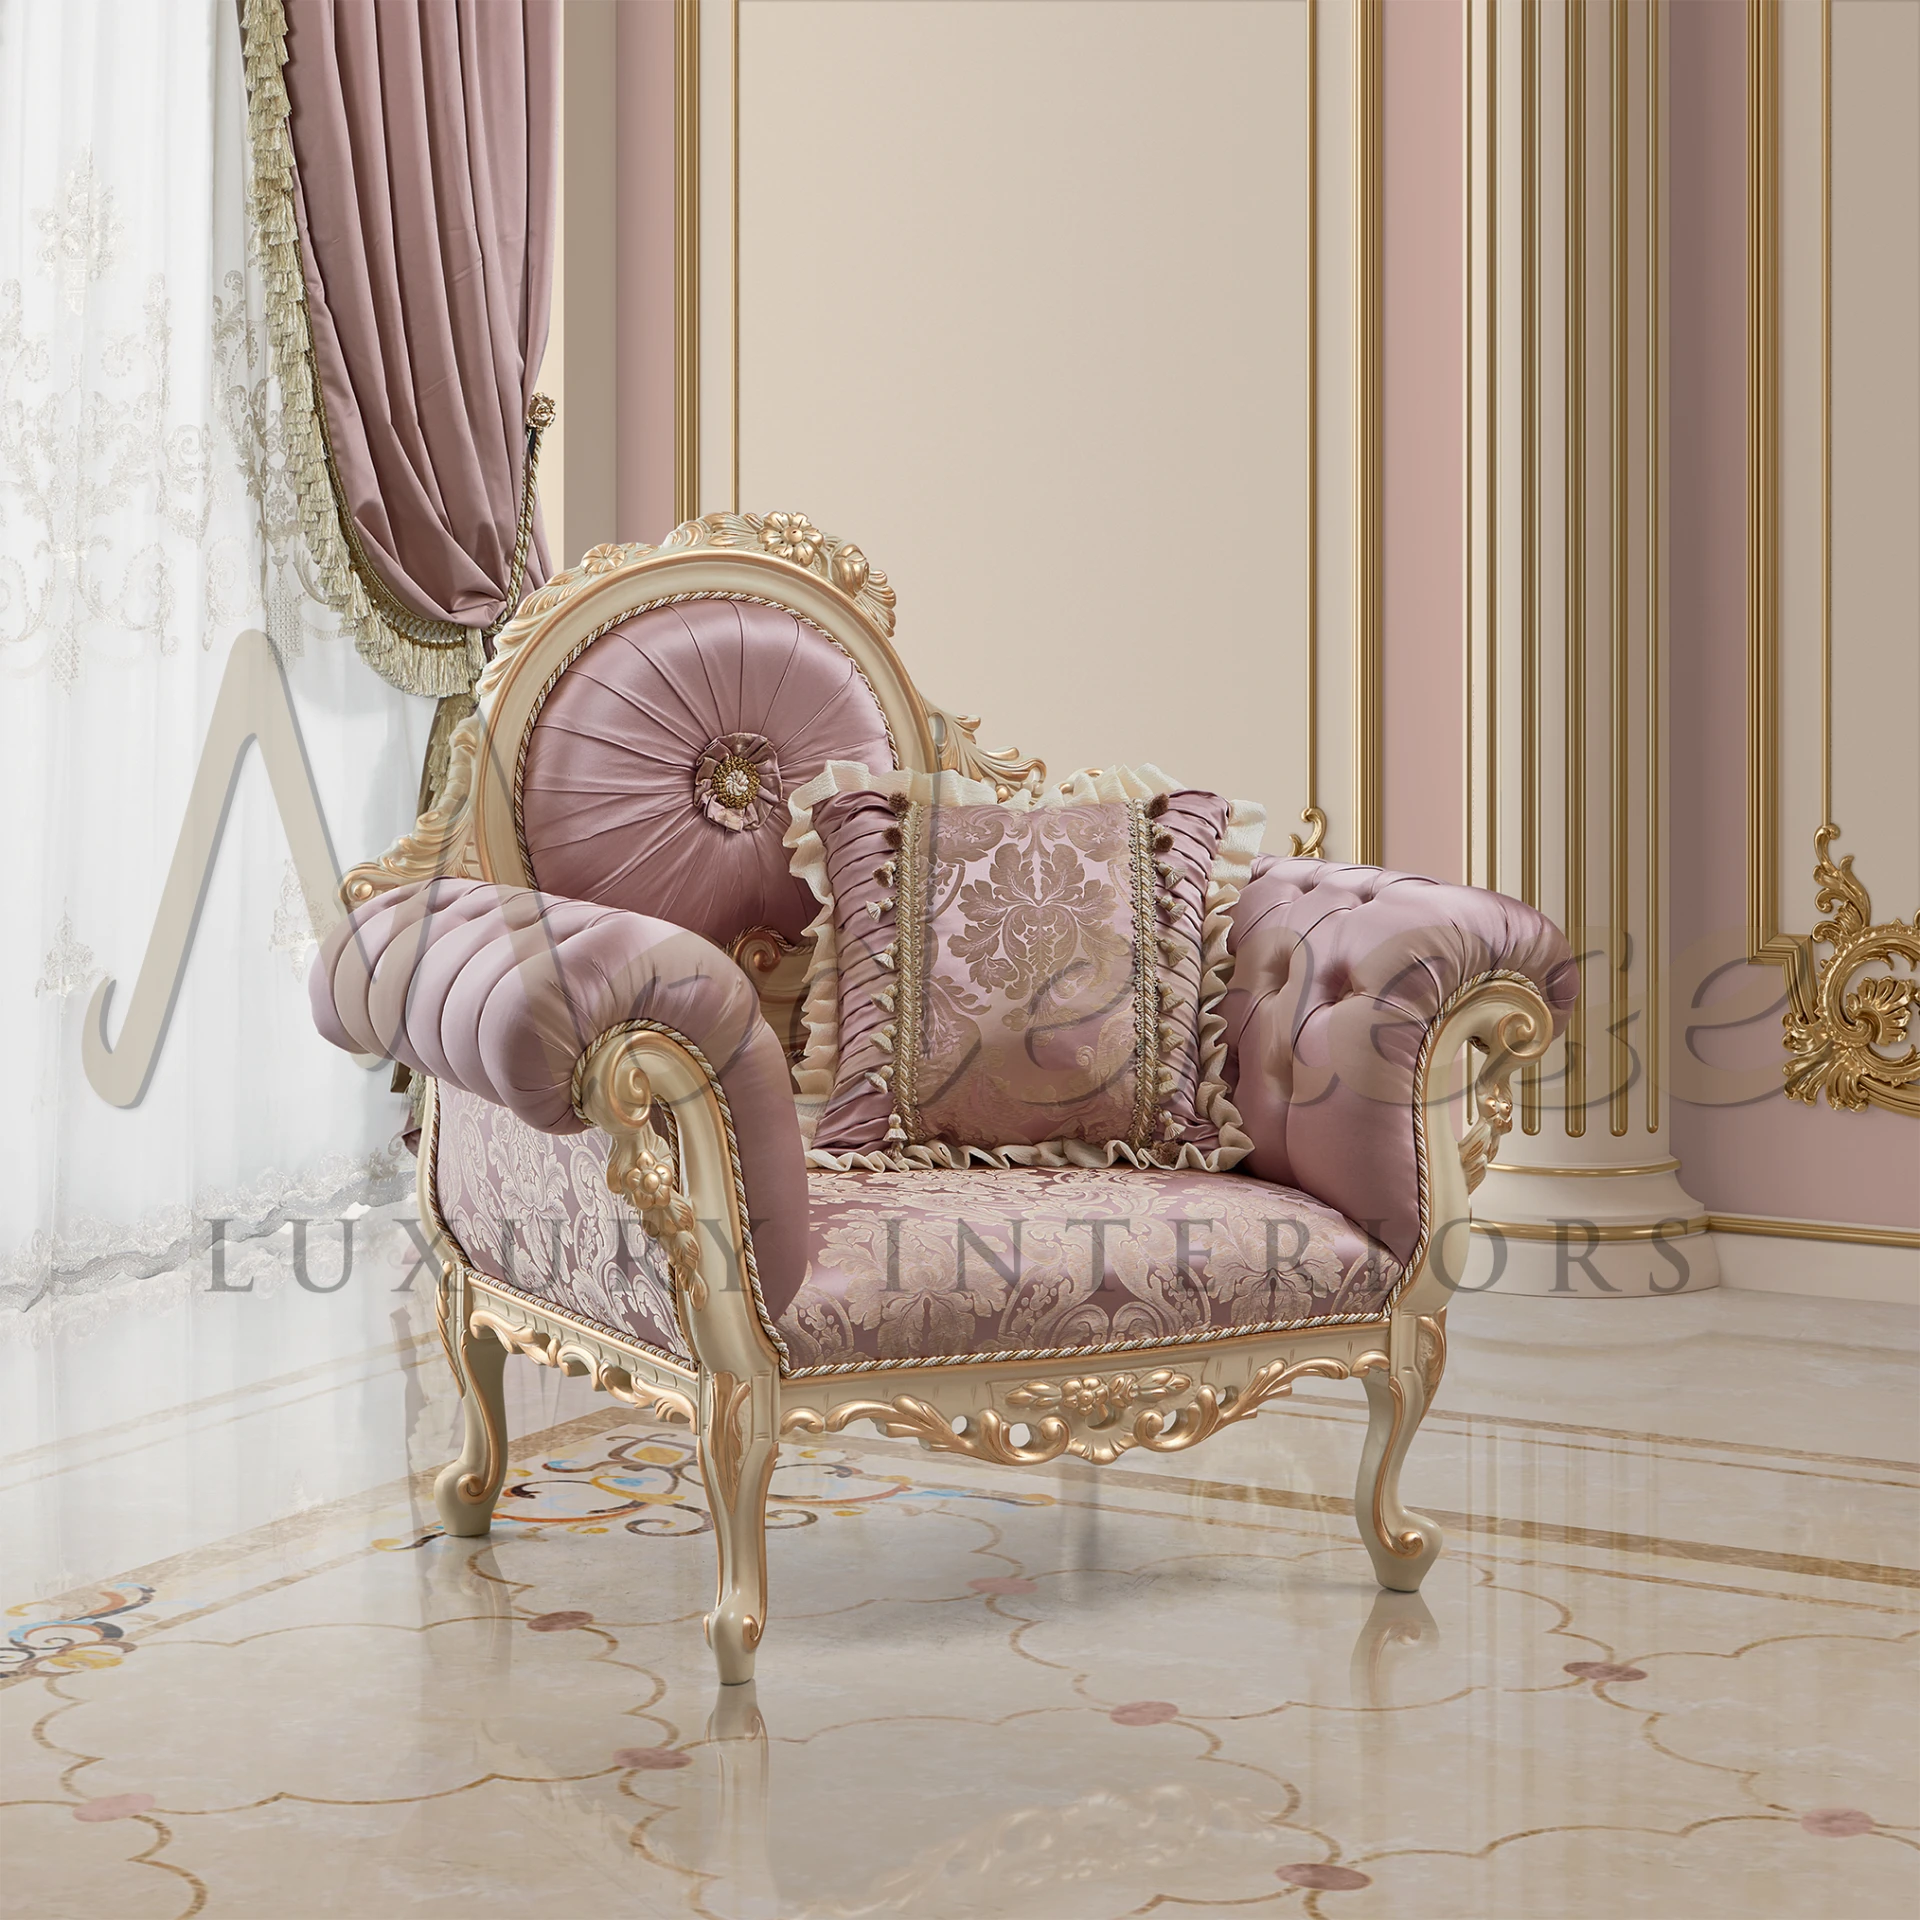 Classic Victorian Armchair with tufting and nailhead trim, featuring ivory lacquer and gold leaf details for a regal look.
